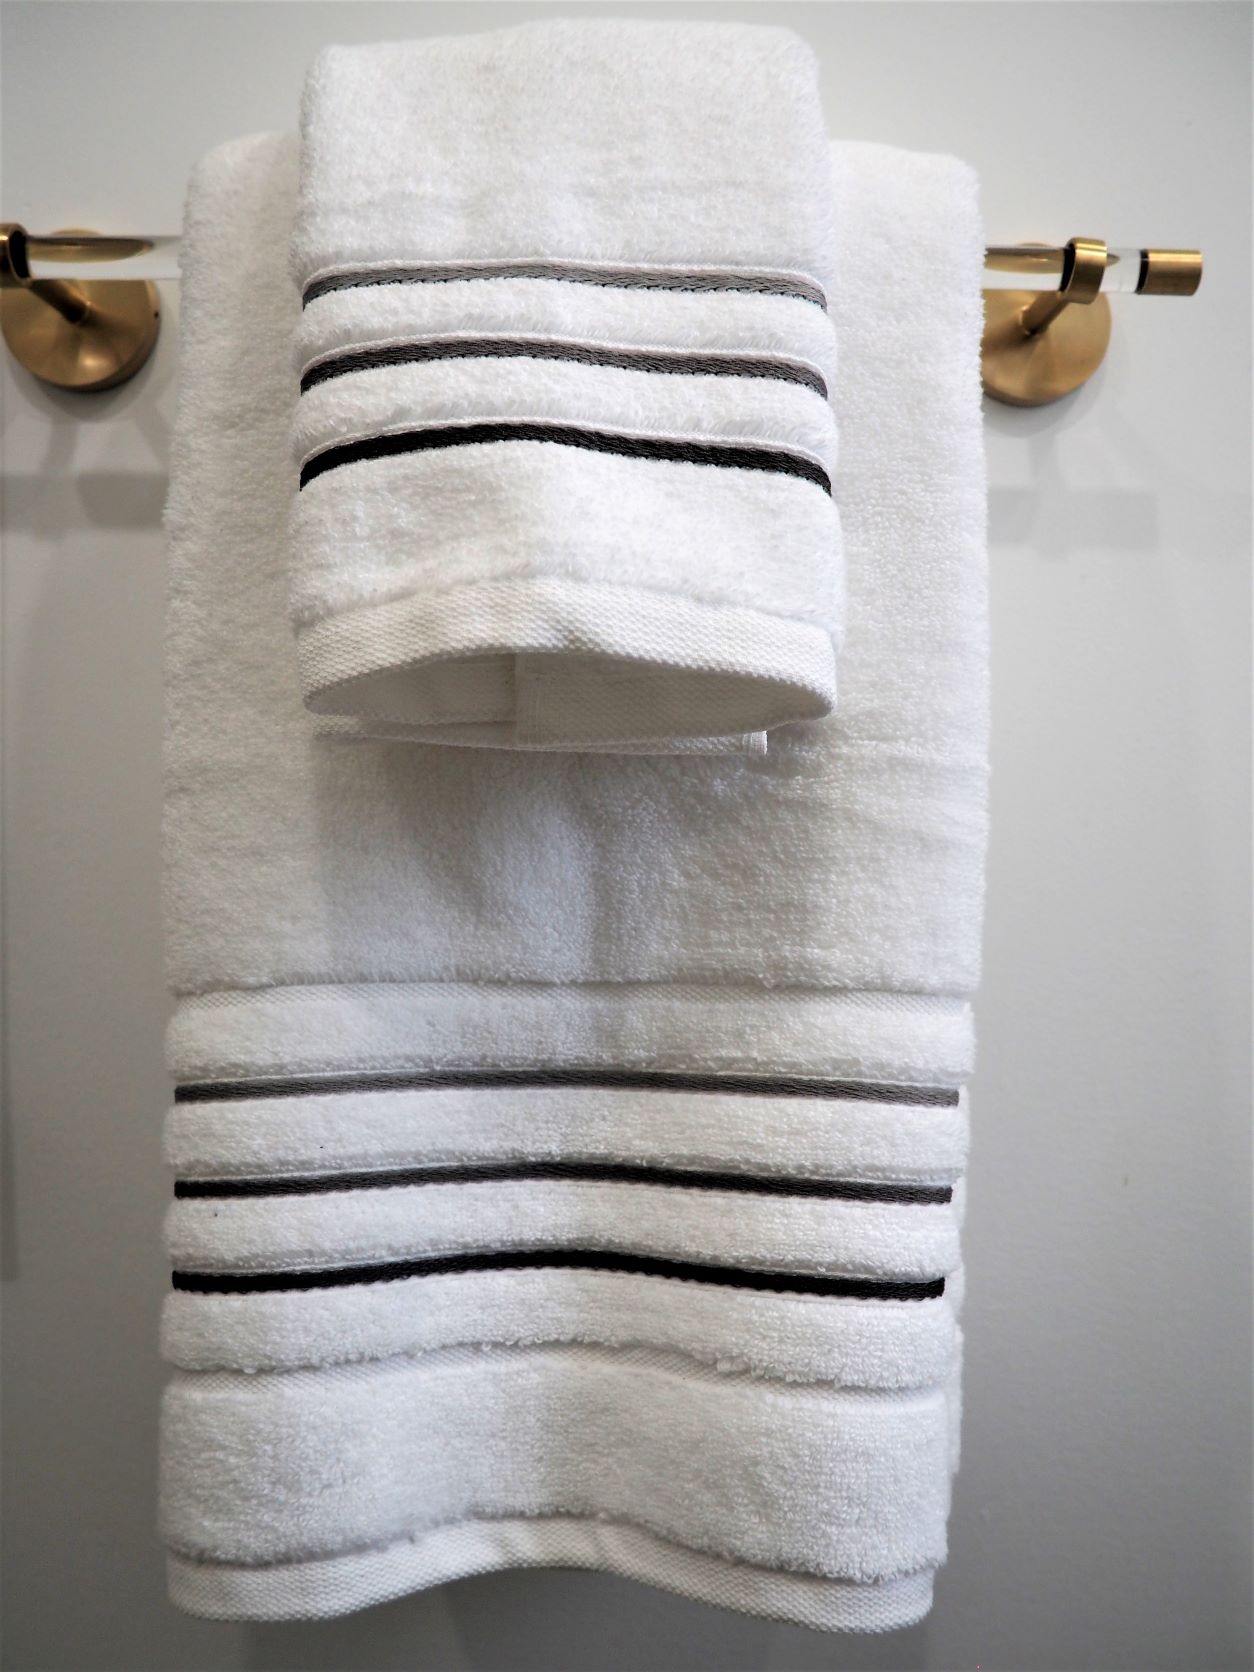 Organic White Towels with Charcoal Trim add a Hotel Style